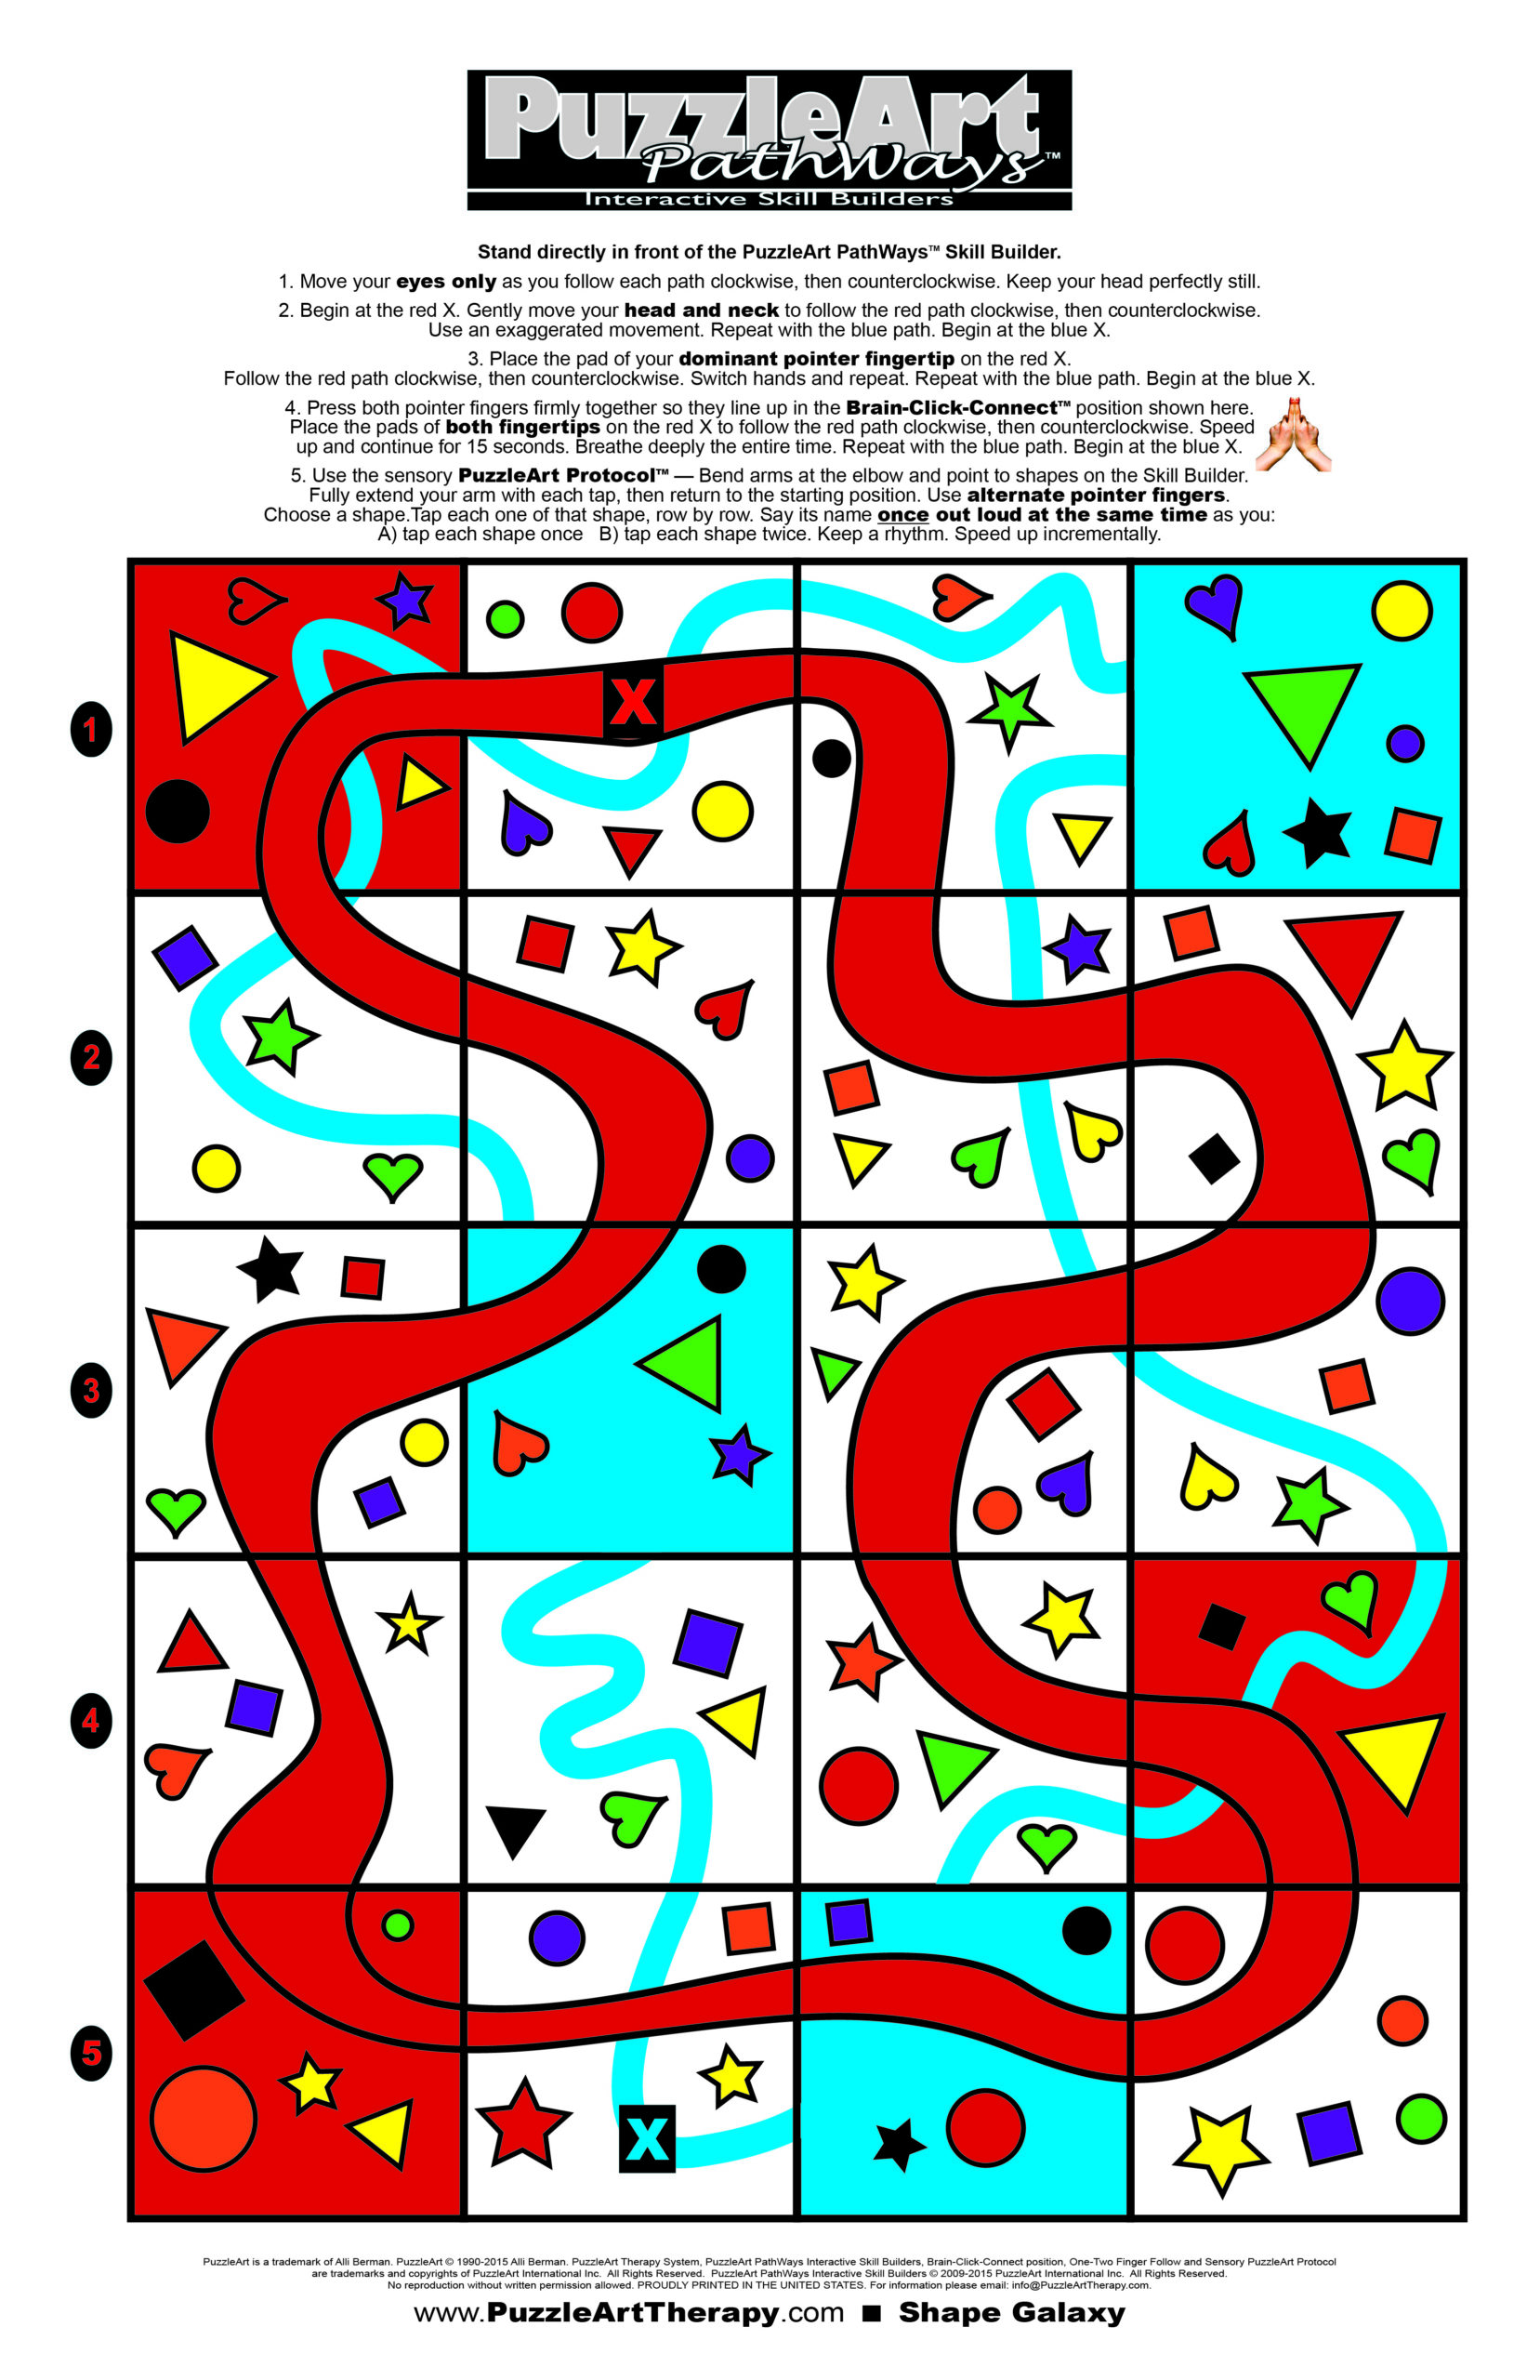 PASB2S.16 - PuzzleArt Skill Builders (28) Master 11 X 17 AB 2015